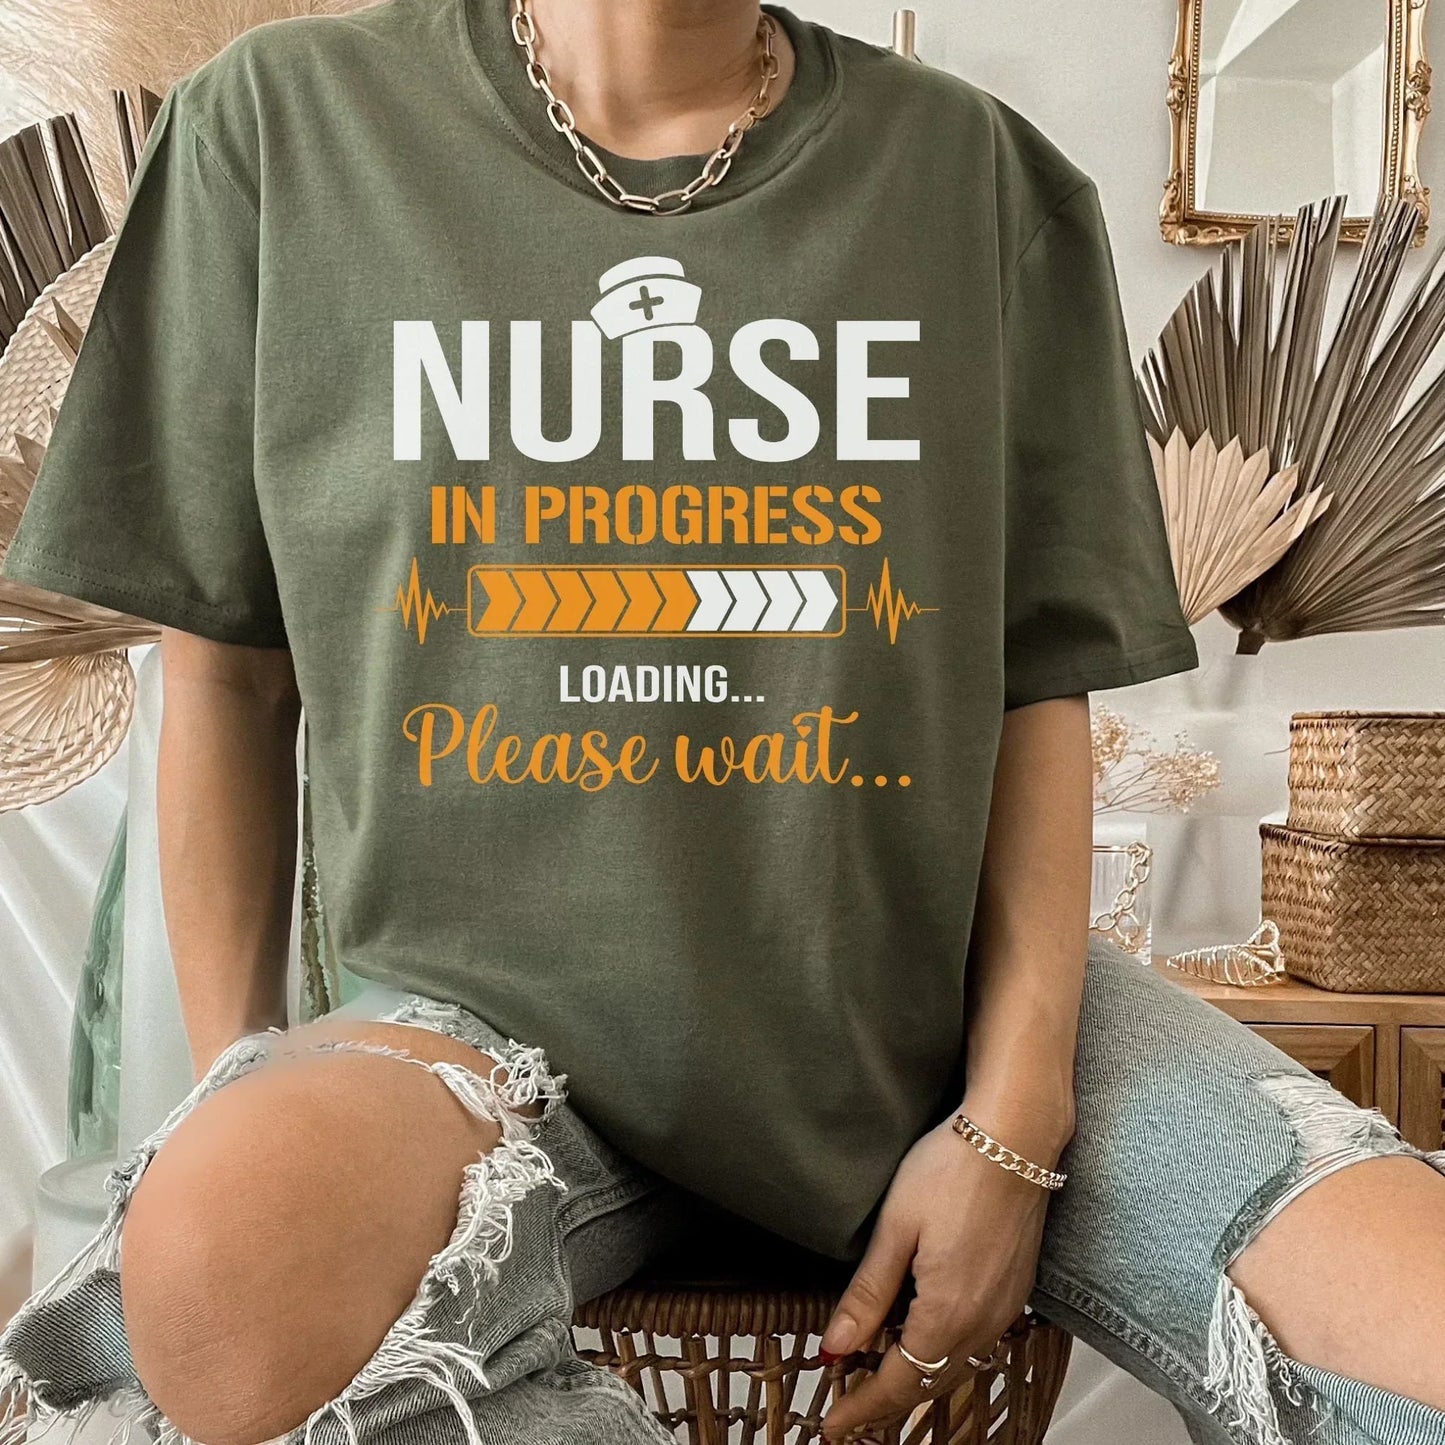 Nurse Student Shirt-Great for Students, Practitioners, New Grads, RN, ICU Oncology, Pediatric, ER, L&D, Retired Nurse Week Appreciation Gift